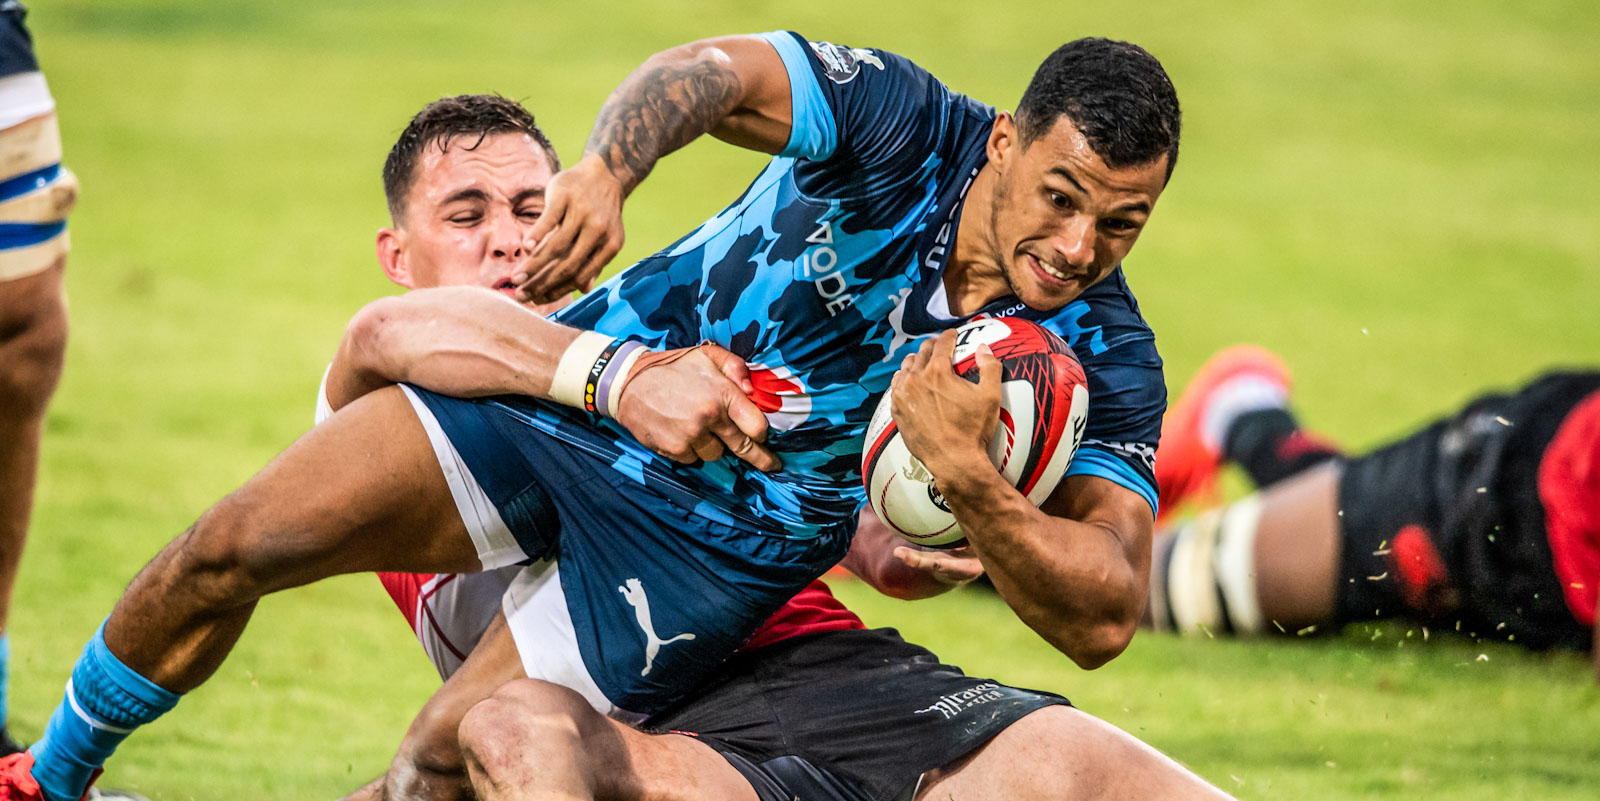 Embrose Papier scored the only try the last time the Vodacom Bulls and Xerox Lions met